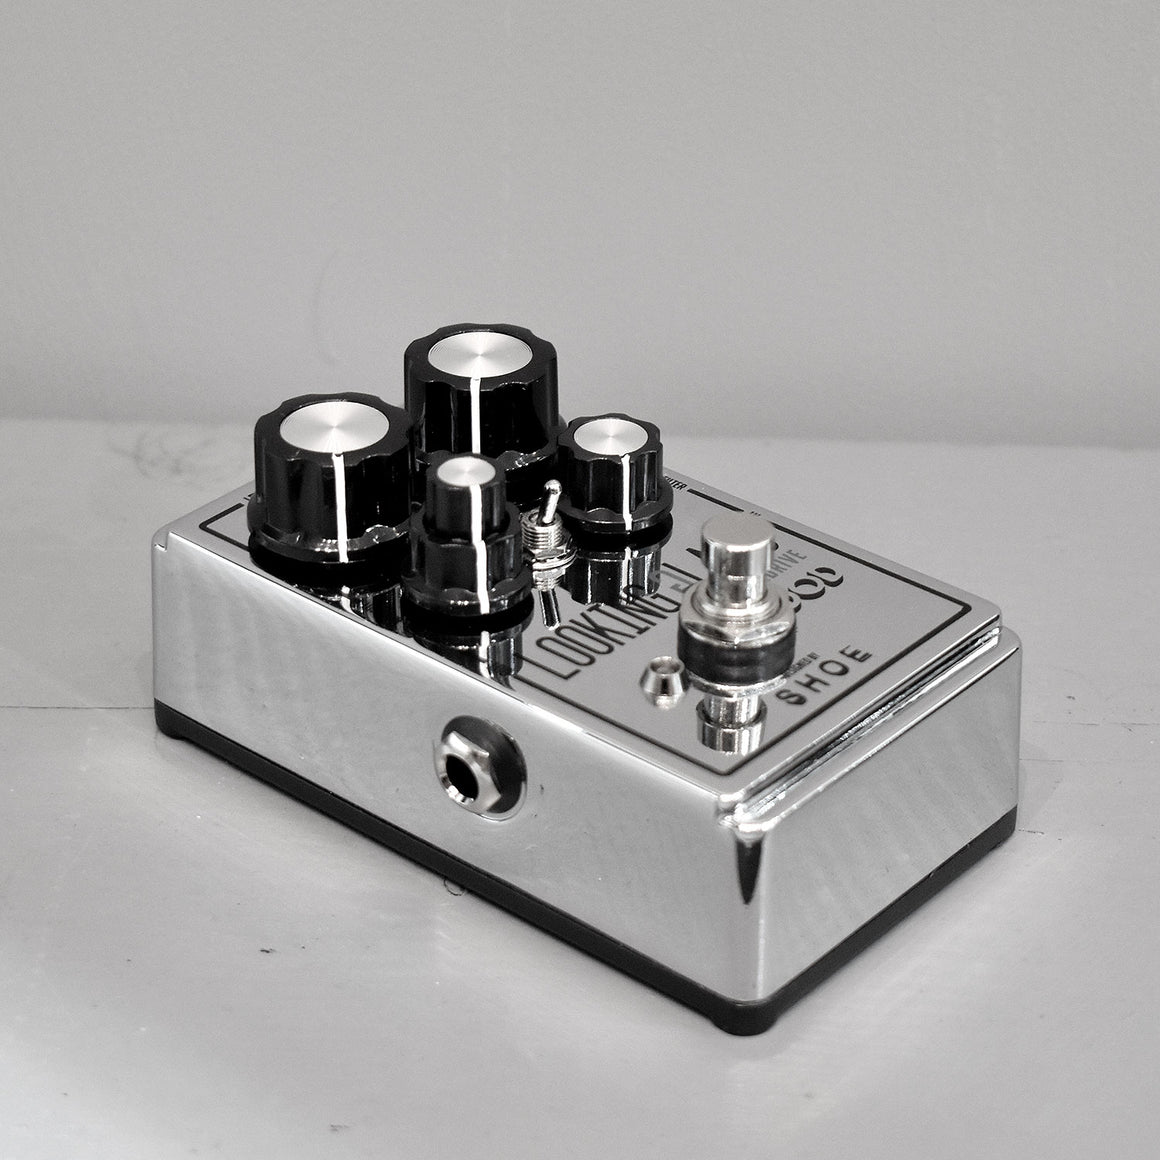 DOD Looking Glass Overdrive Pedal